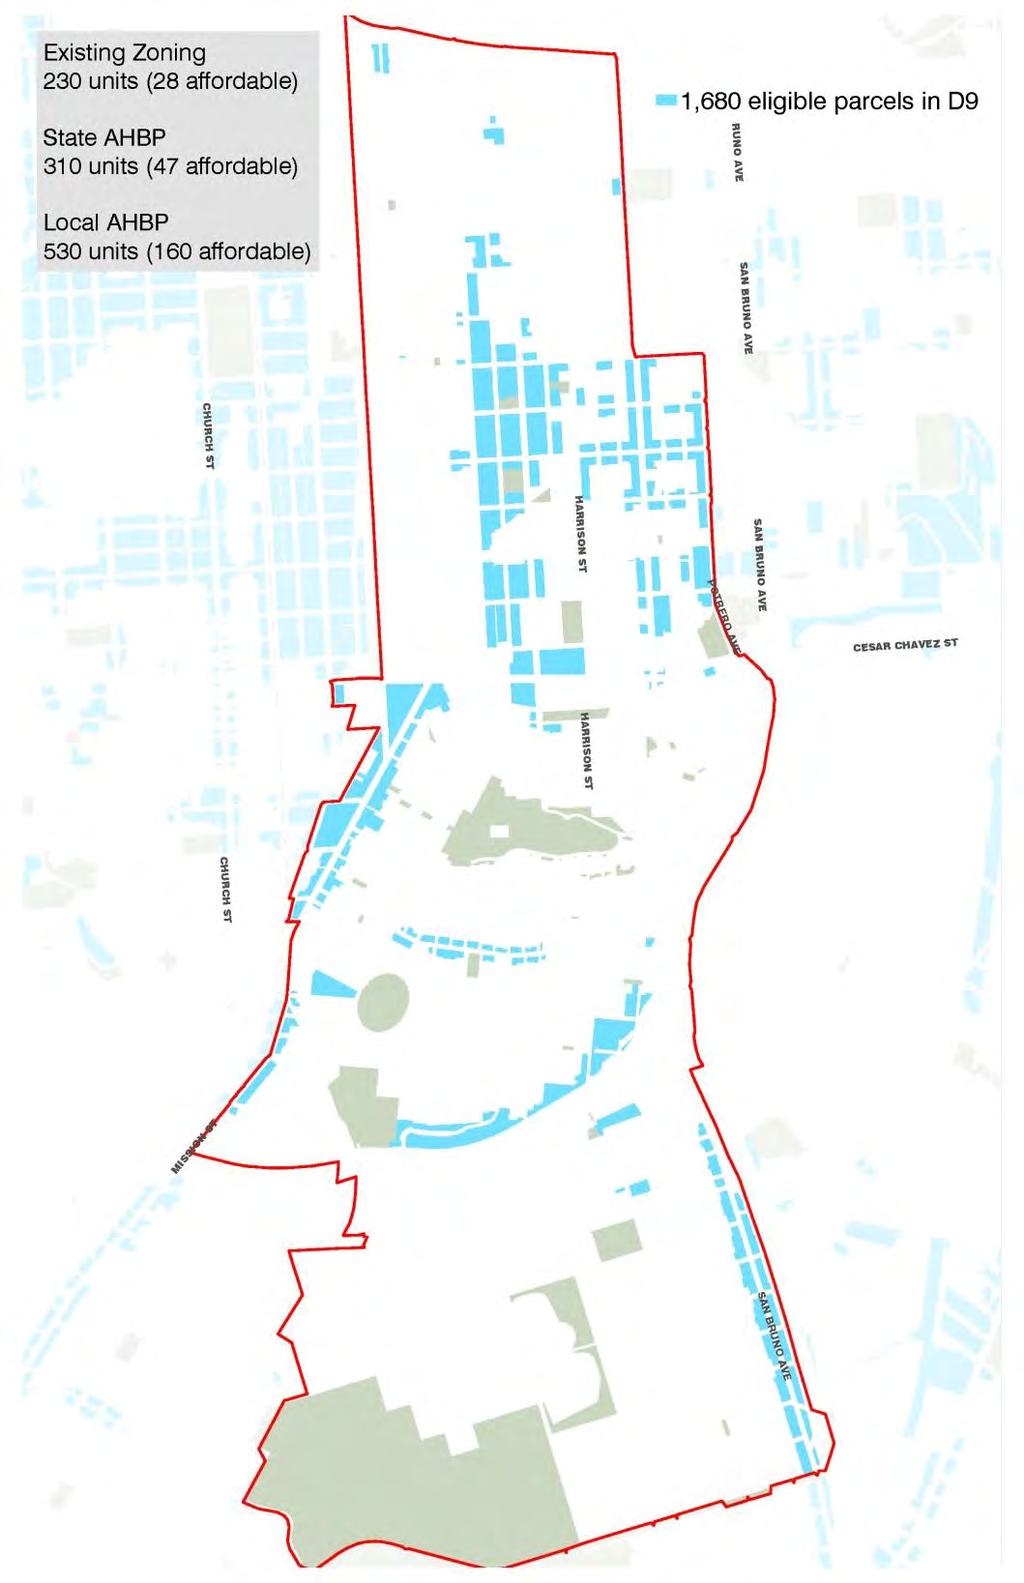 Program Area and Units District 9